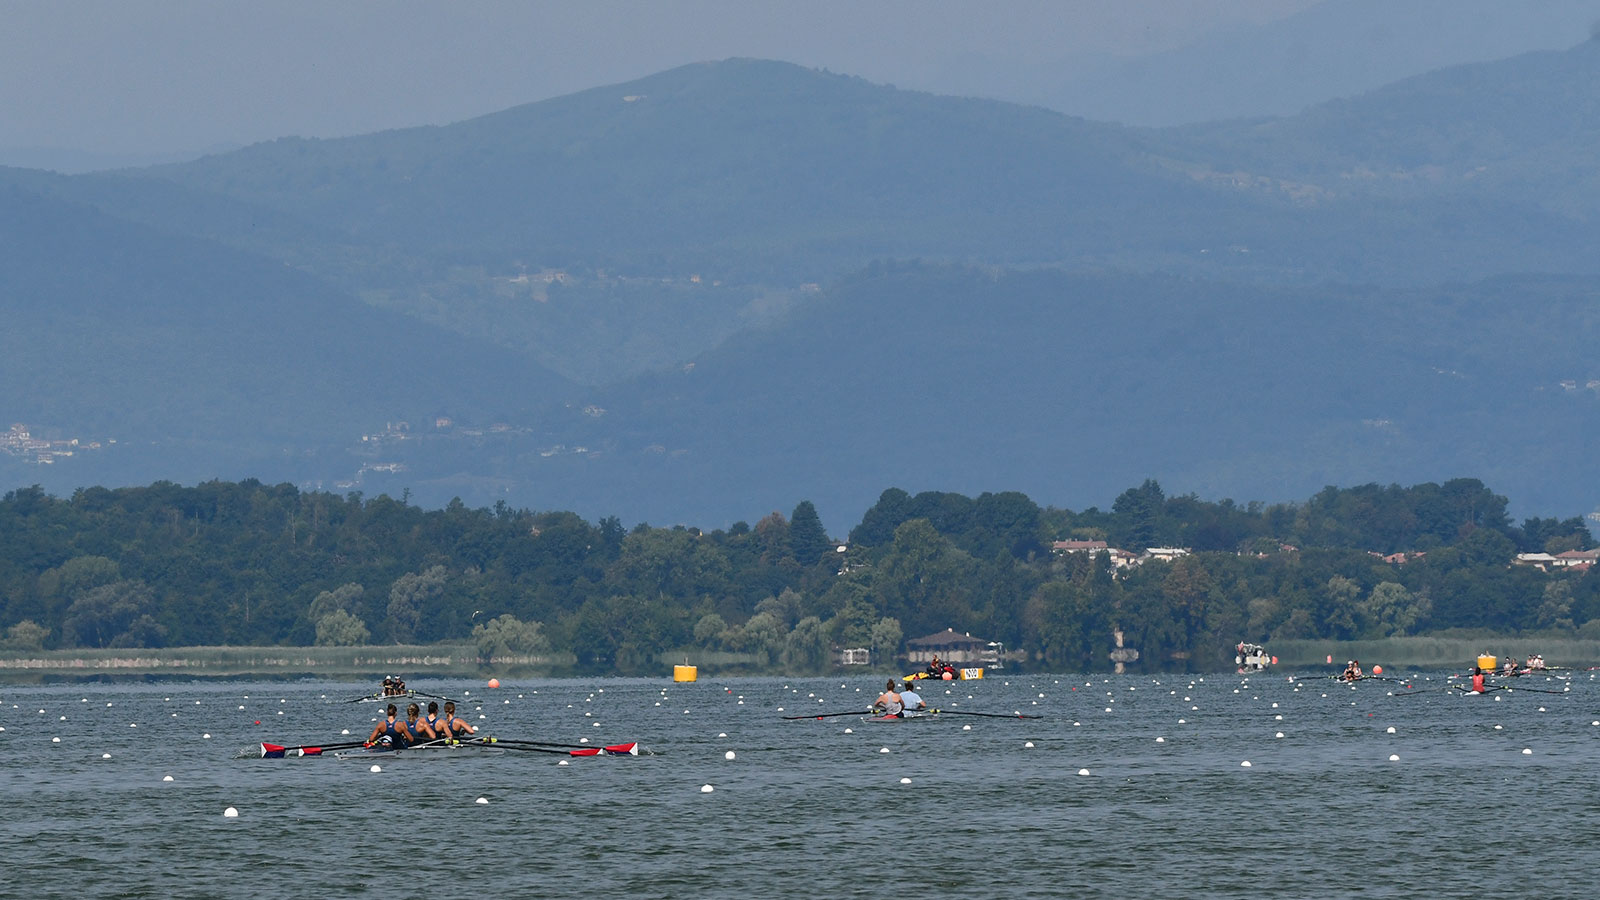 USRowing Misconduct Incident Report